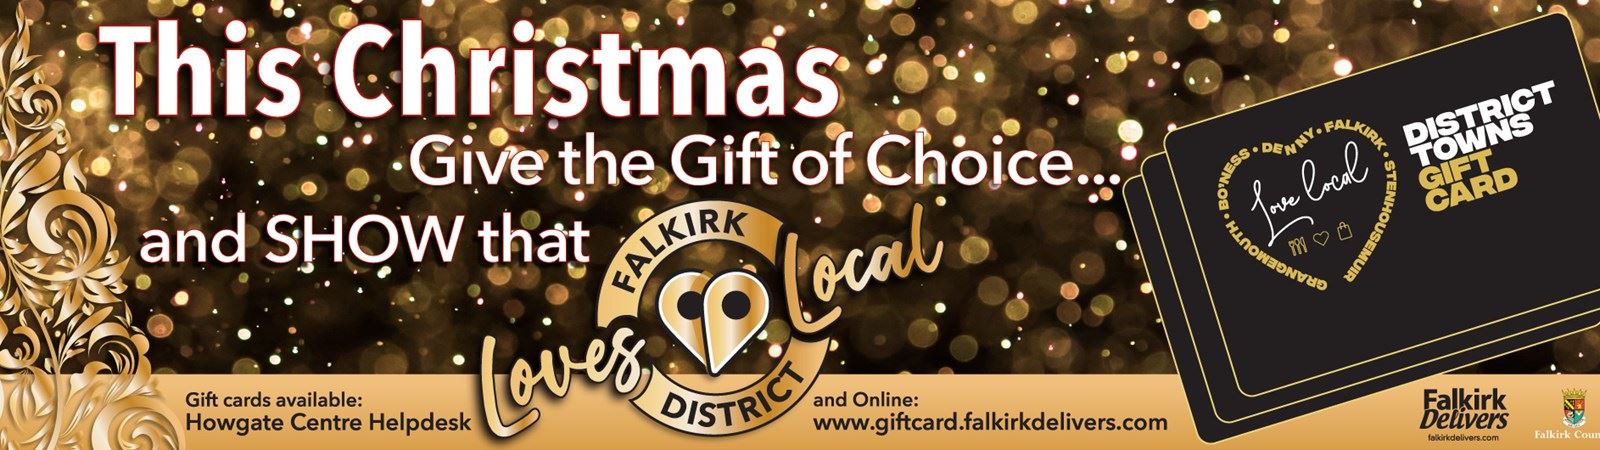 Falkirk district towns gift card Christmas 